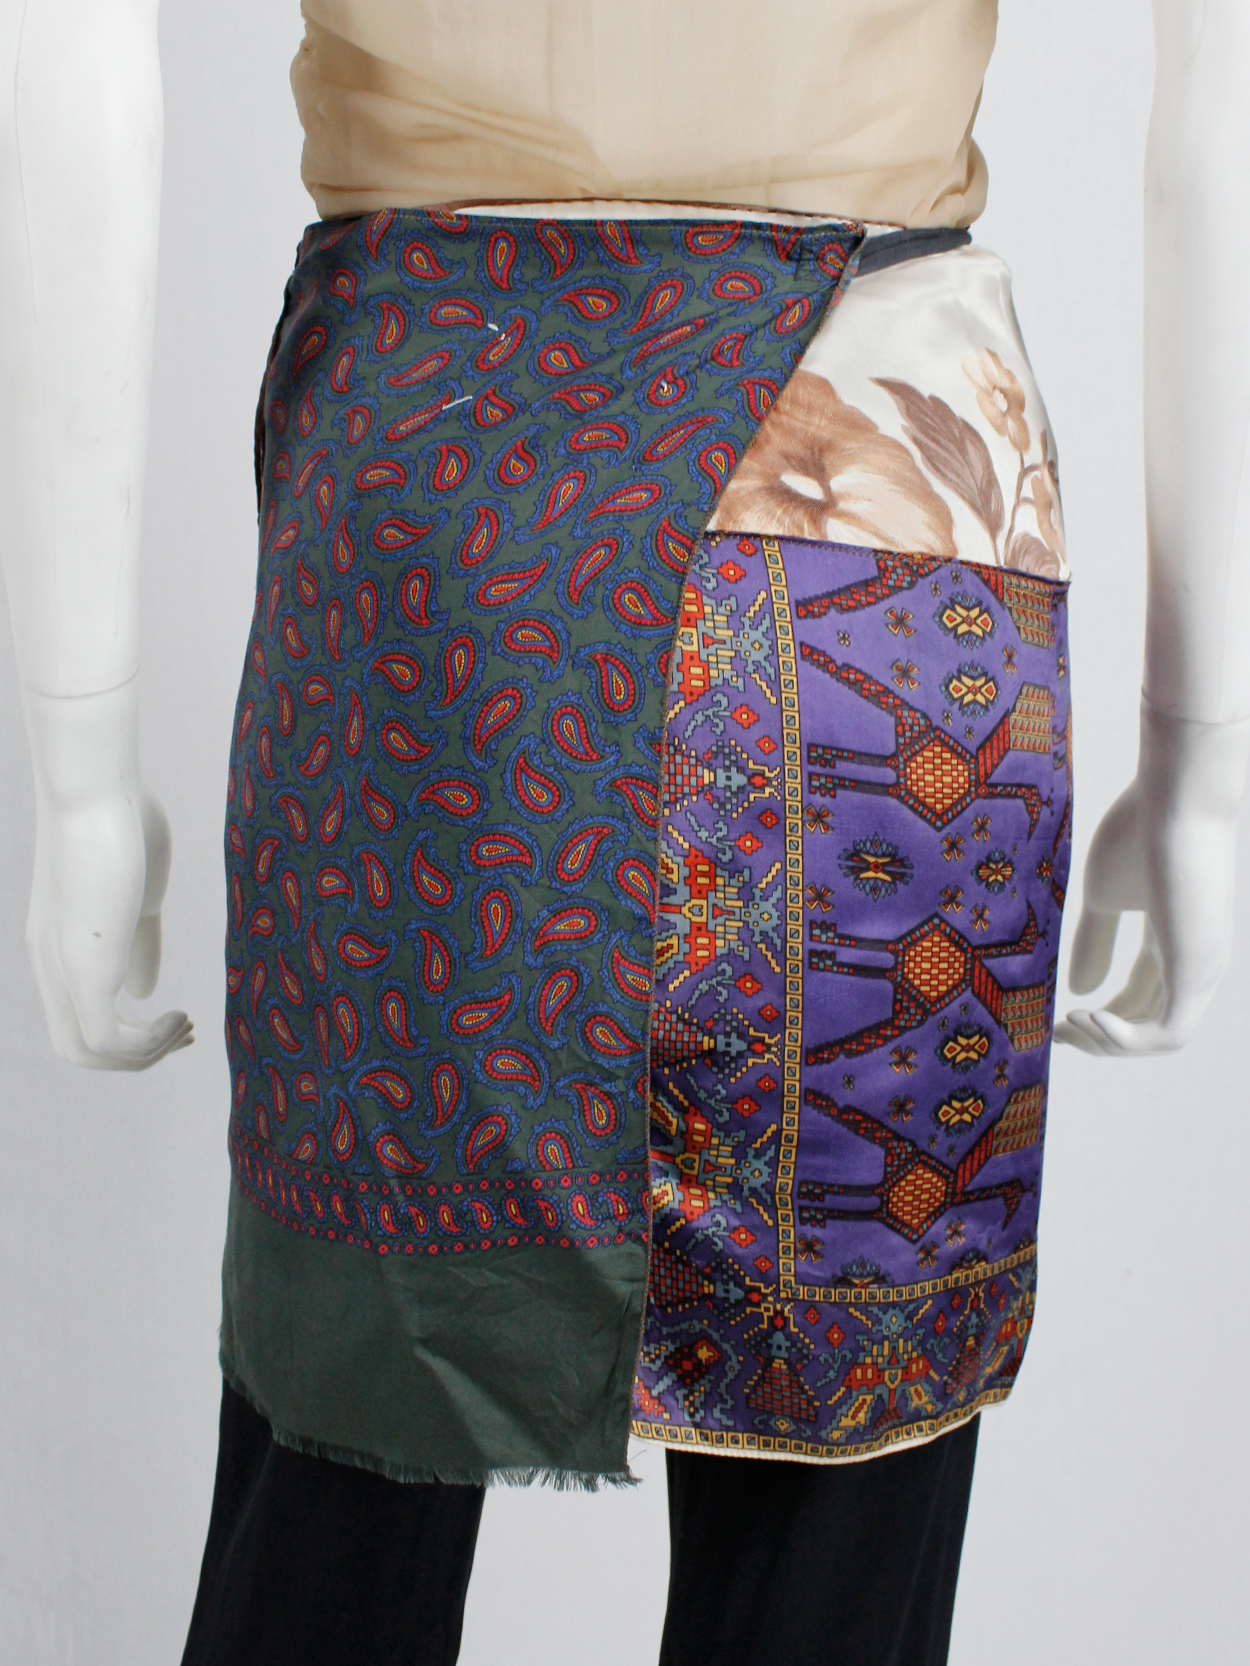 archive Maison Martin Margiela wrap skirt made of multiple scarfs sewn together spring 1992 (11)